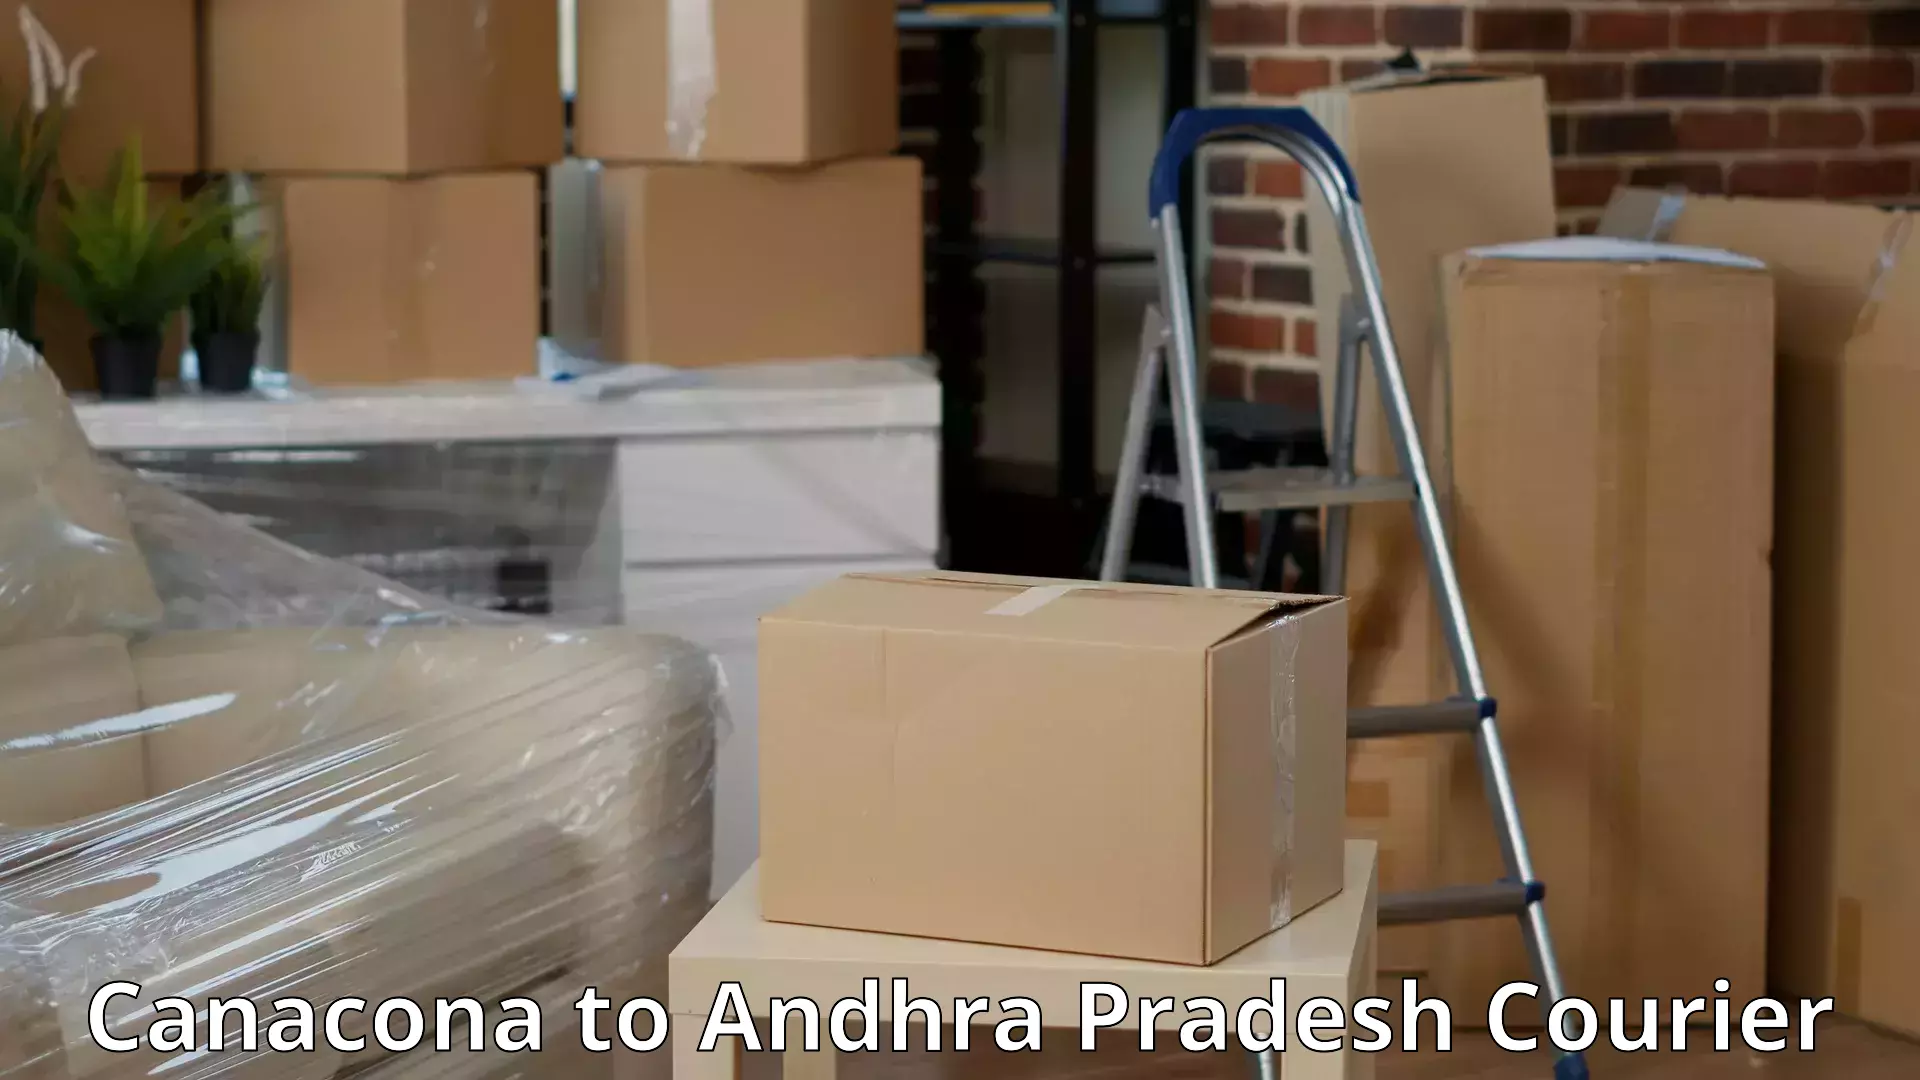 Reliable moving assistance Canacona to Visakhapatnam Port